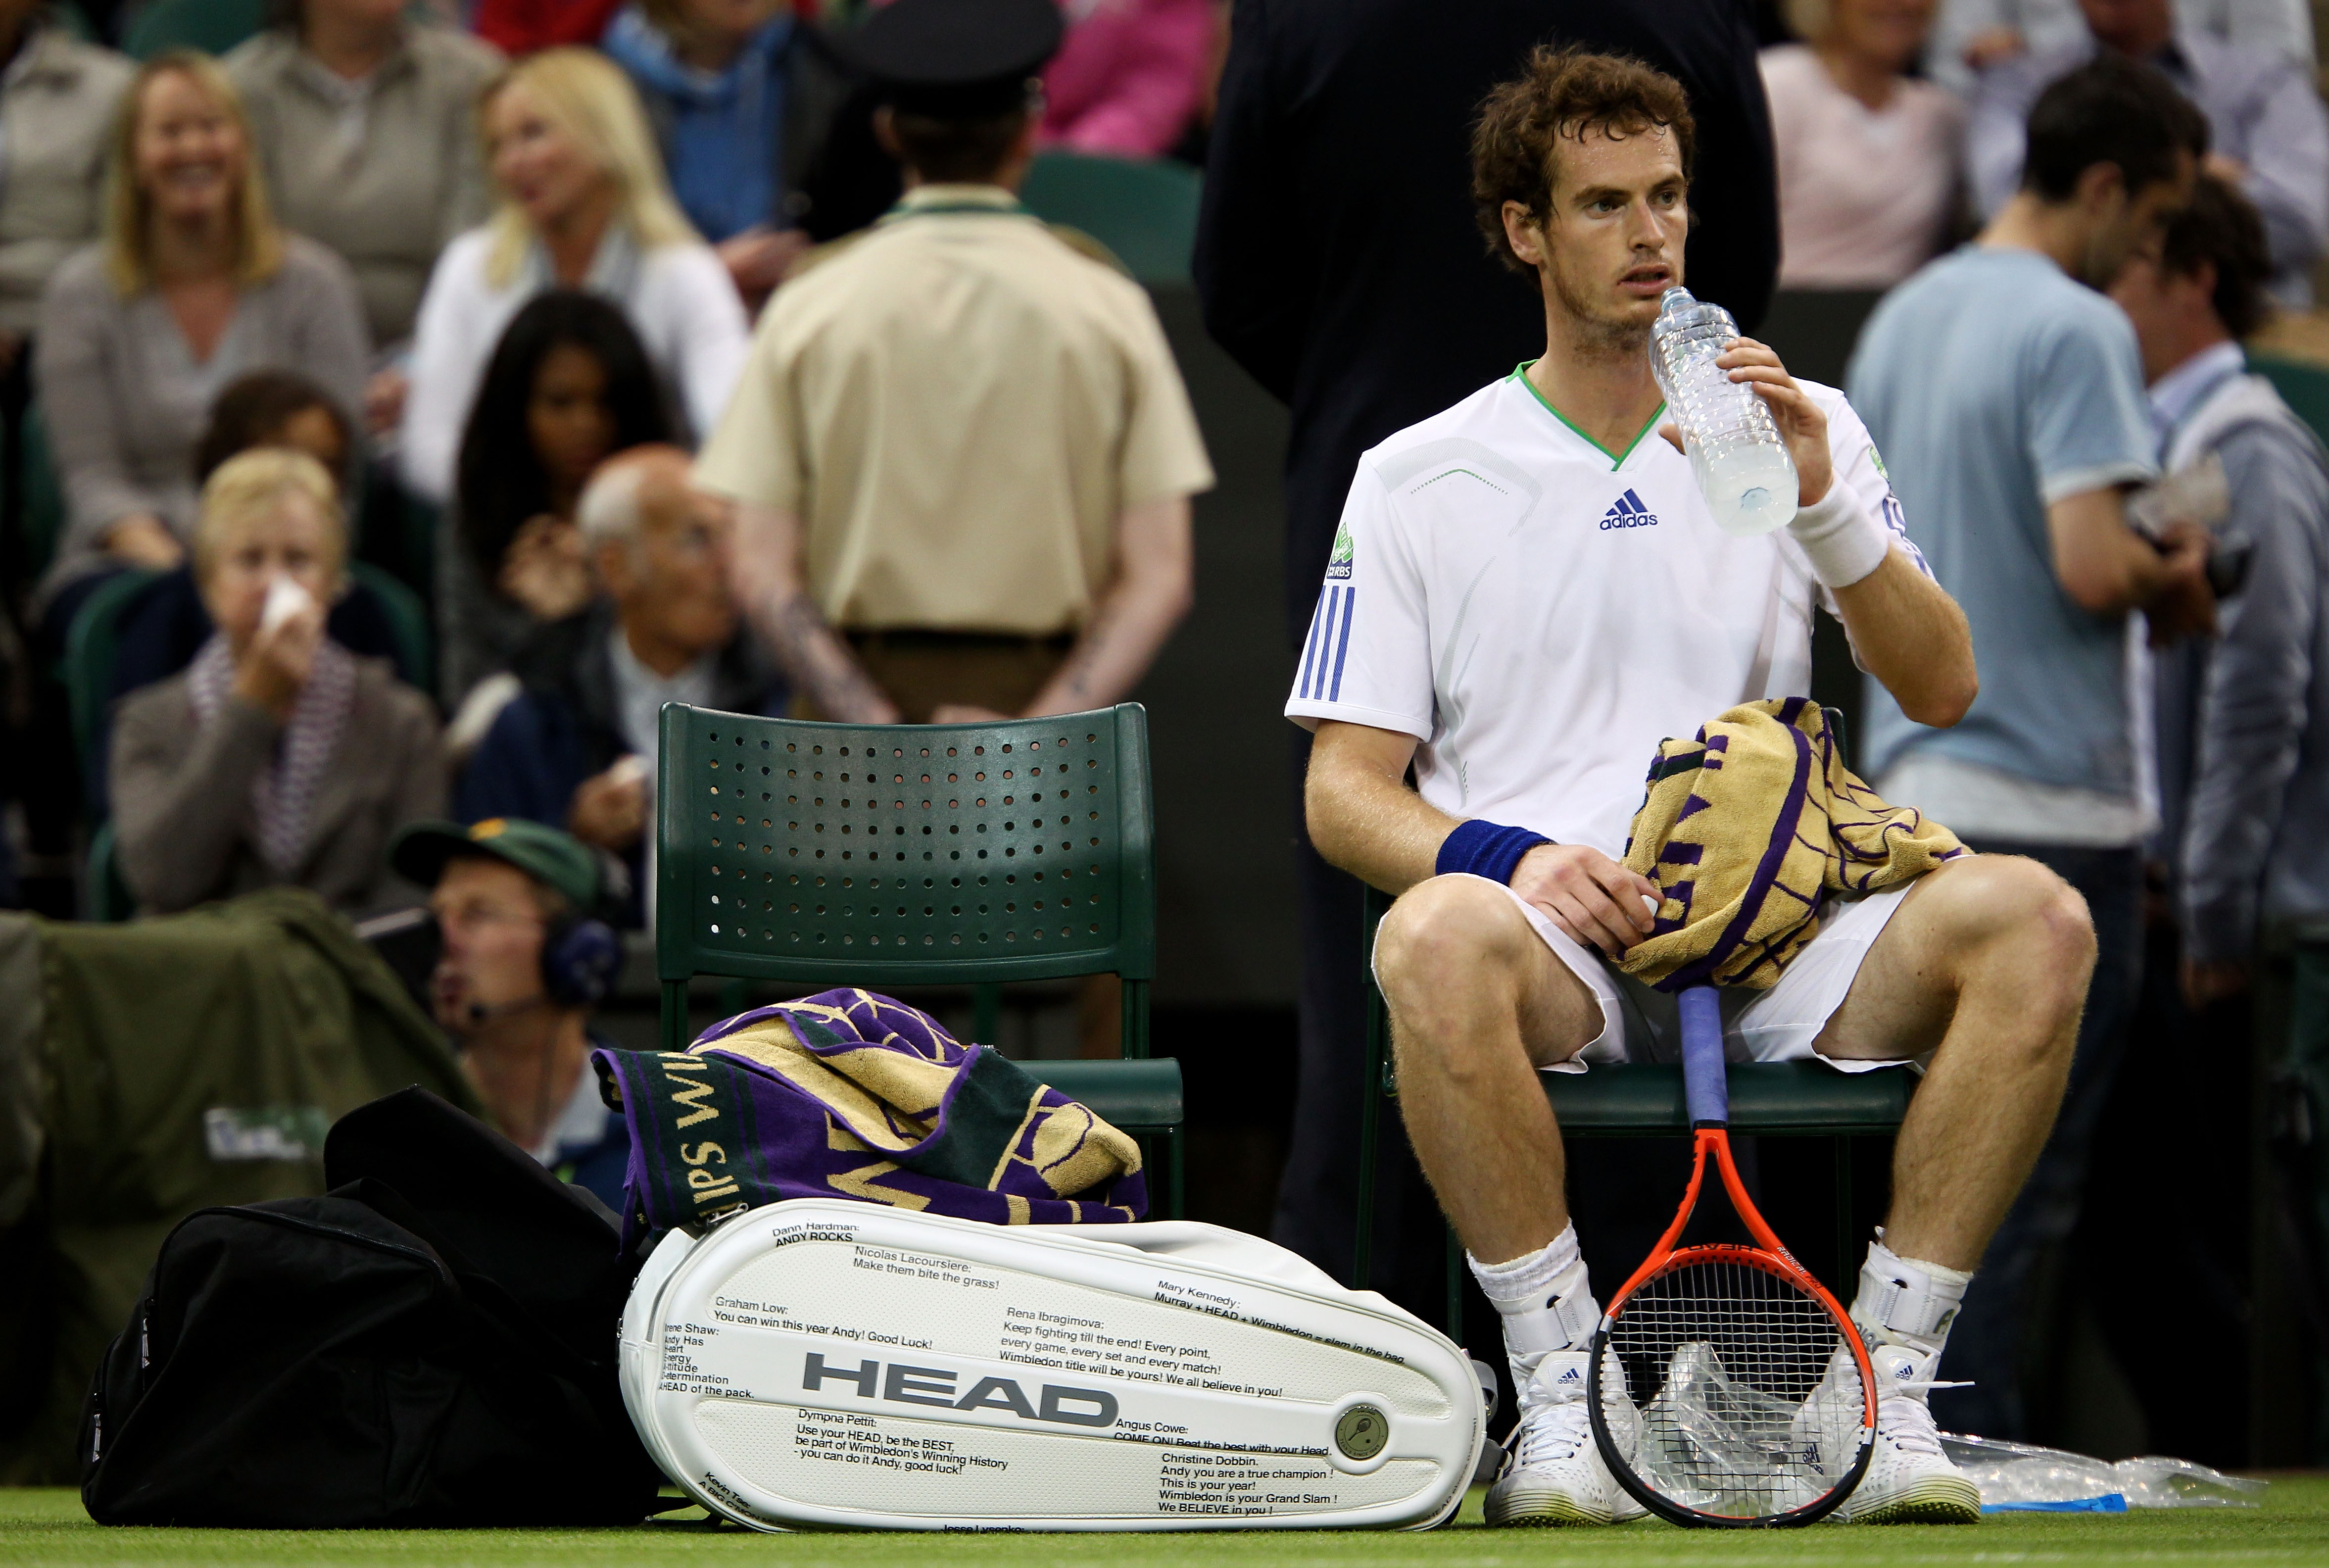 LONDON, ENGLAND - JUNE 20:  Andy Murray of Great Britain takes a break during his first round match against Daniel Gimeno-Traver of Spain on Day One of the Wimbledon Lawn Tennis Championships at the All England Lawn Tennis and Croquet Club on June 20, 201